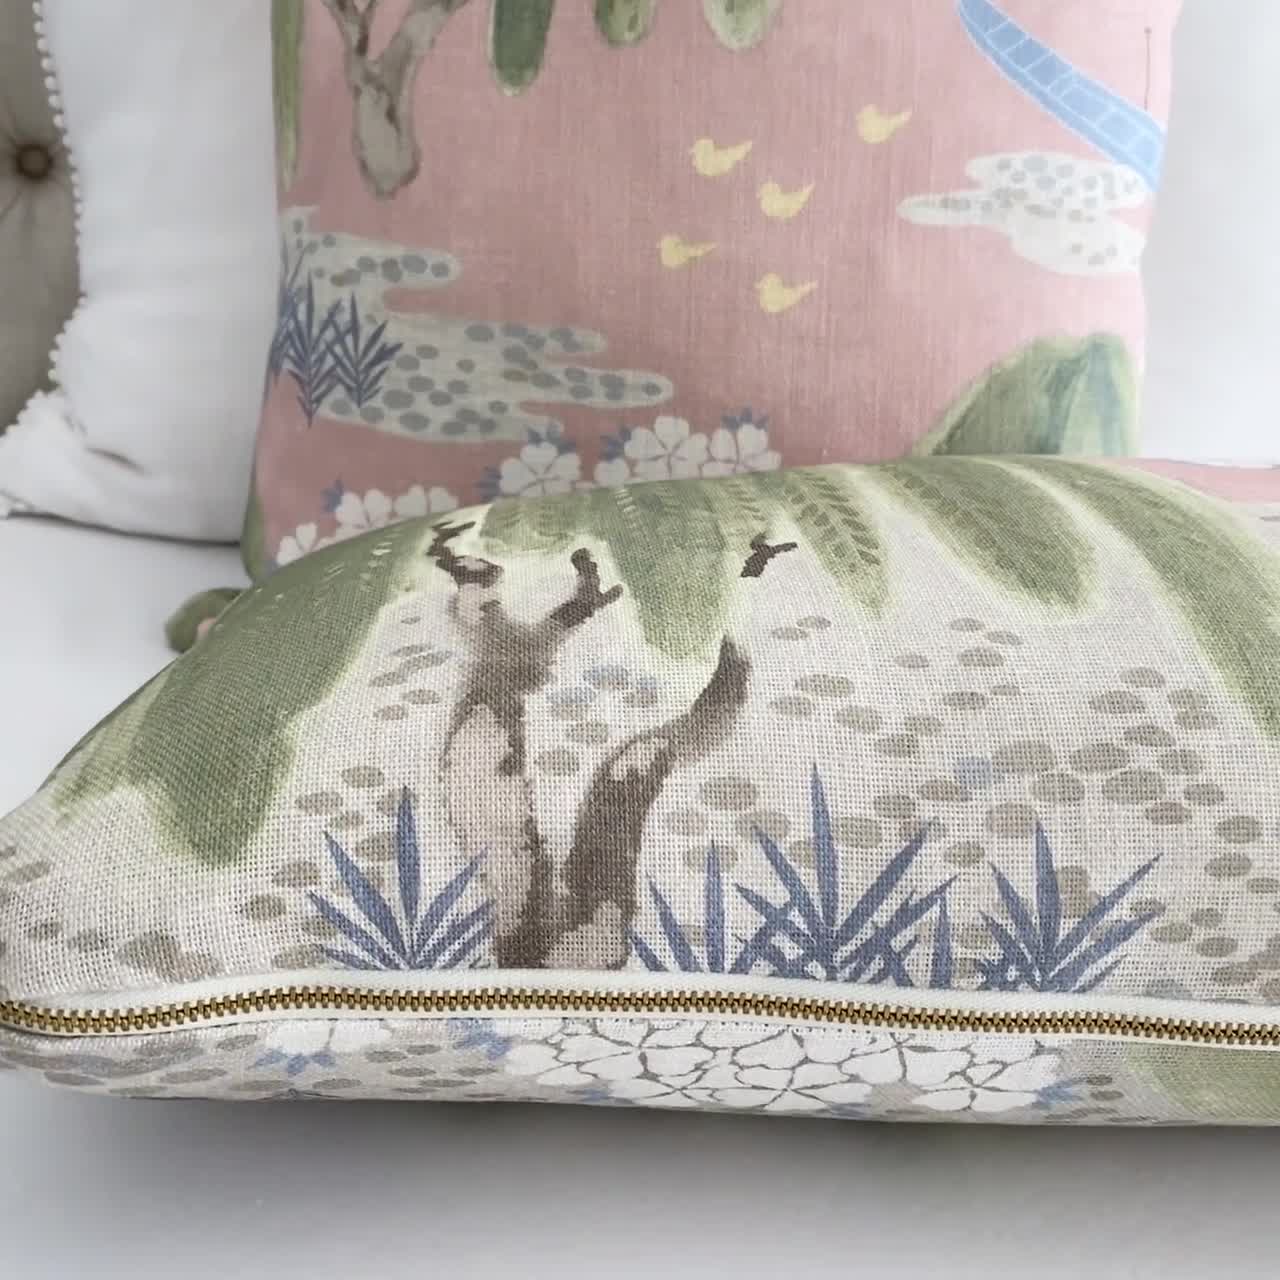 https://v.etsystatic.com/video/upload/q_auto/Thibaut-Willow-Tree-AF23111-Blush-Pink-Chinoiserie-Printed-Floral-Decorative-Throw-Pillow-Cover-Product-Video_fejb4u.jpg